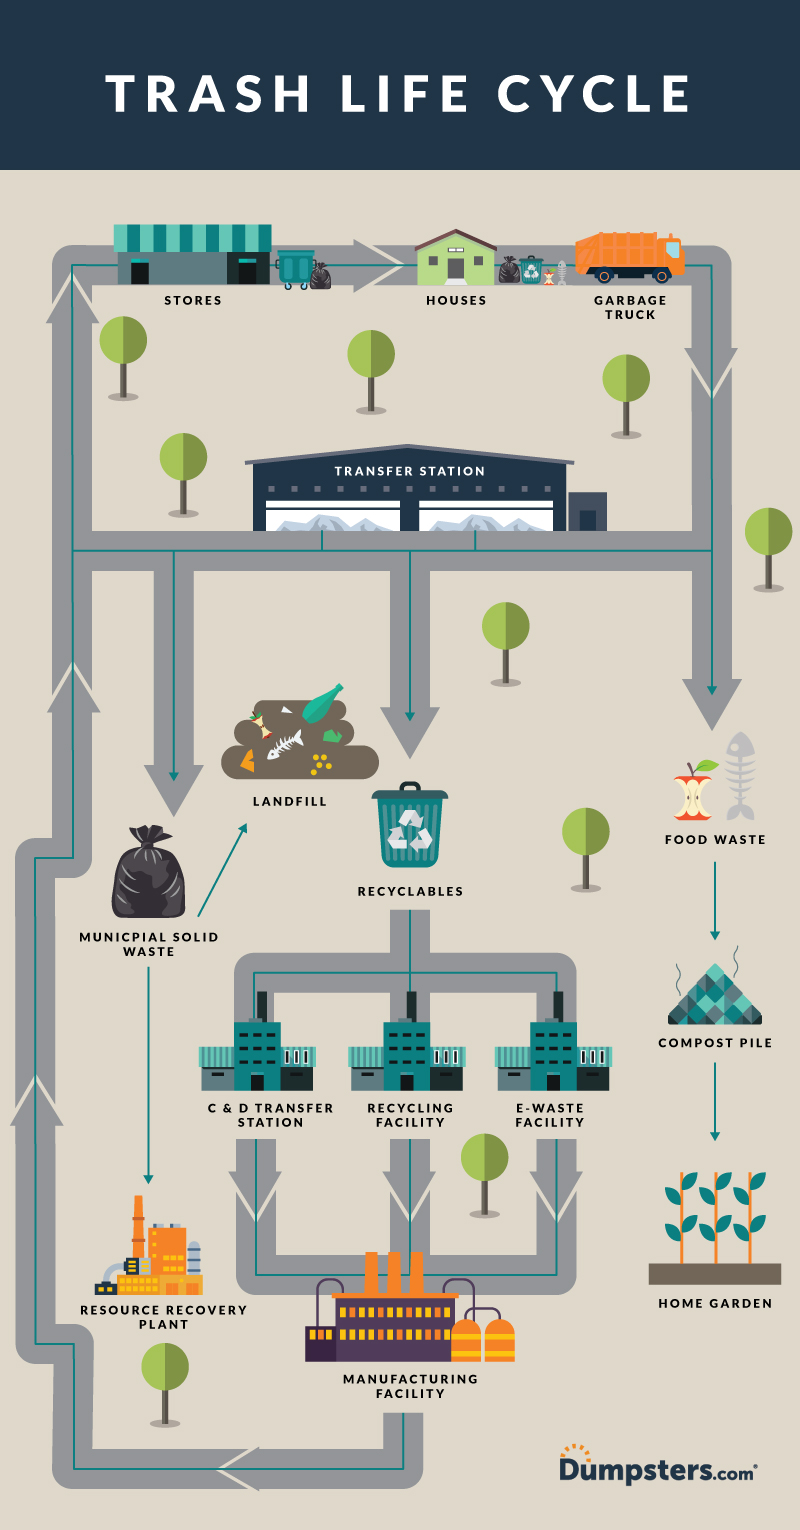 A Dumpsters.com infographic showing what happens to trash from the moment you throw away to its final resting place and all the steps between, including transfer stations, recycling facilities and resource recovery plants.